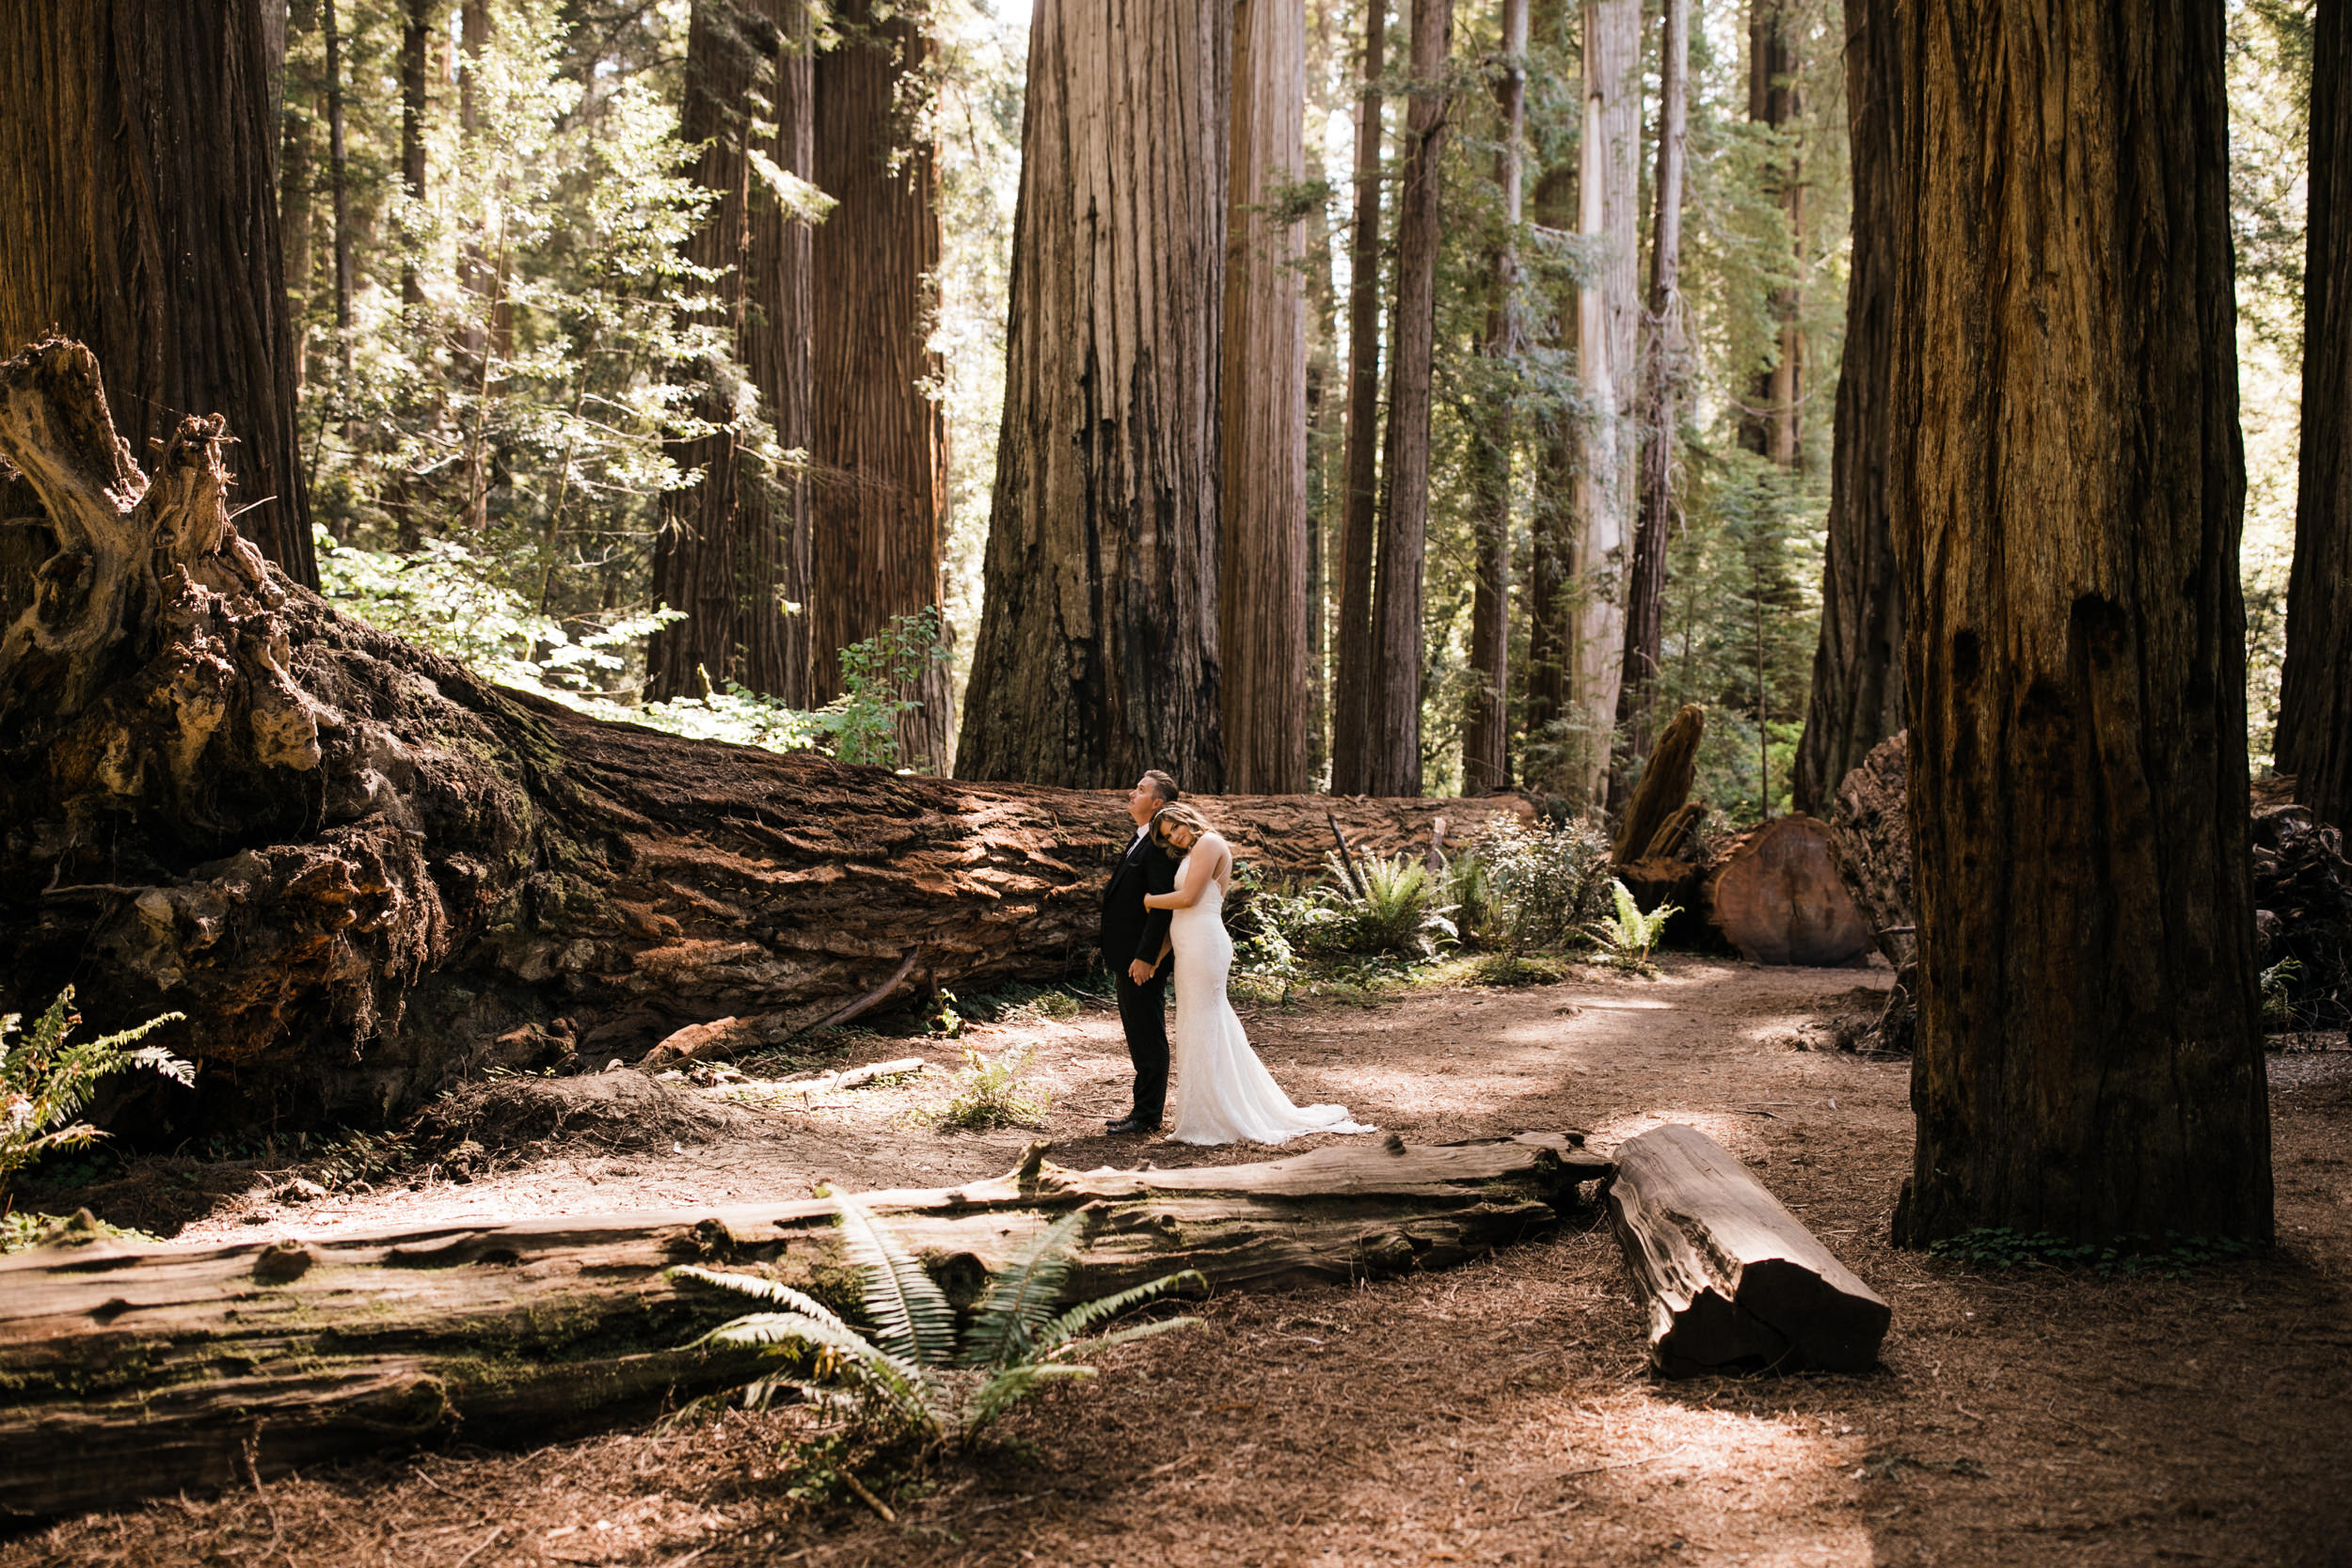 intimate wedding ceremony in the redwood forest | adventure wedding photographer | redwoods national park elopement | www.thehearnes.com